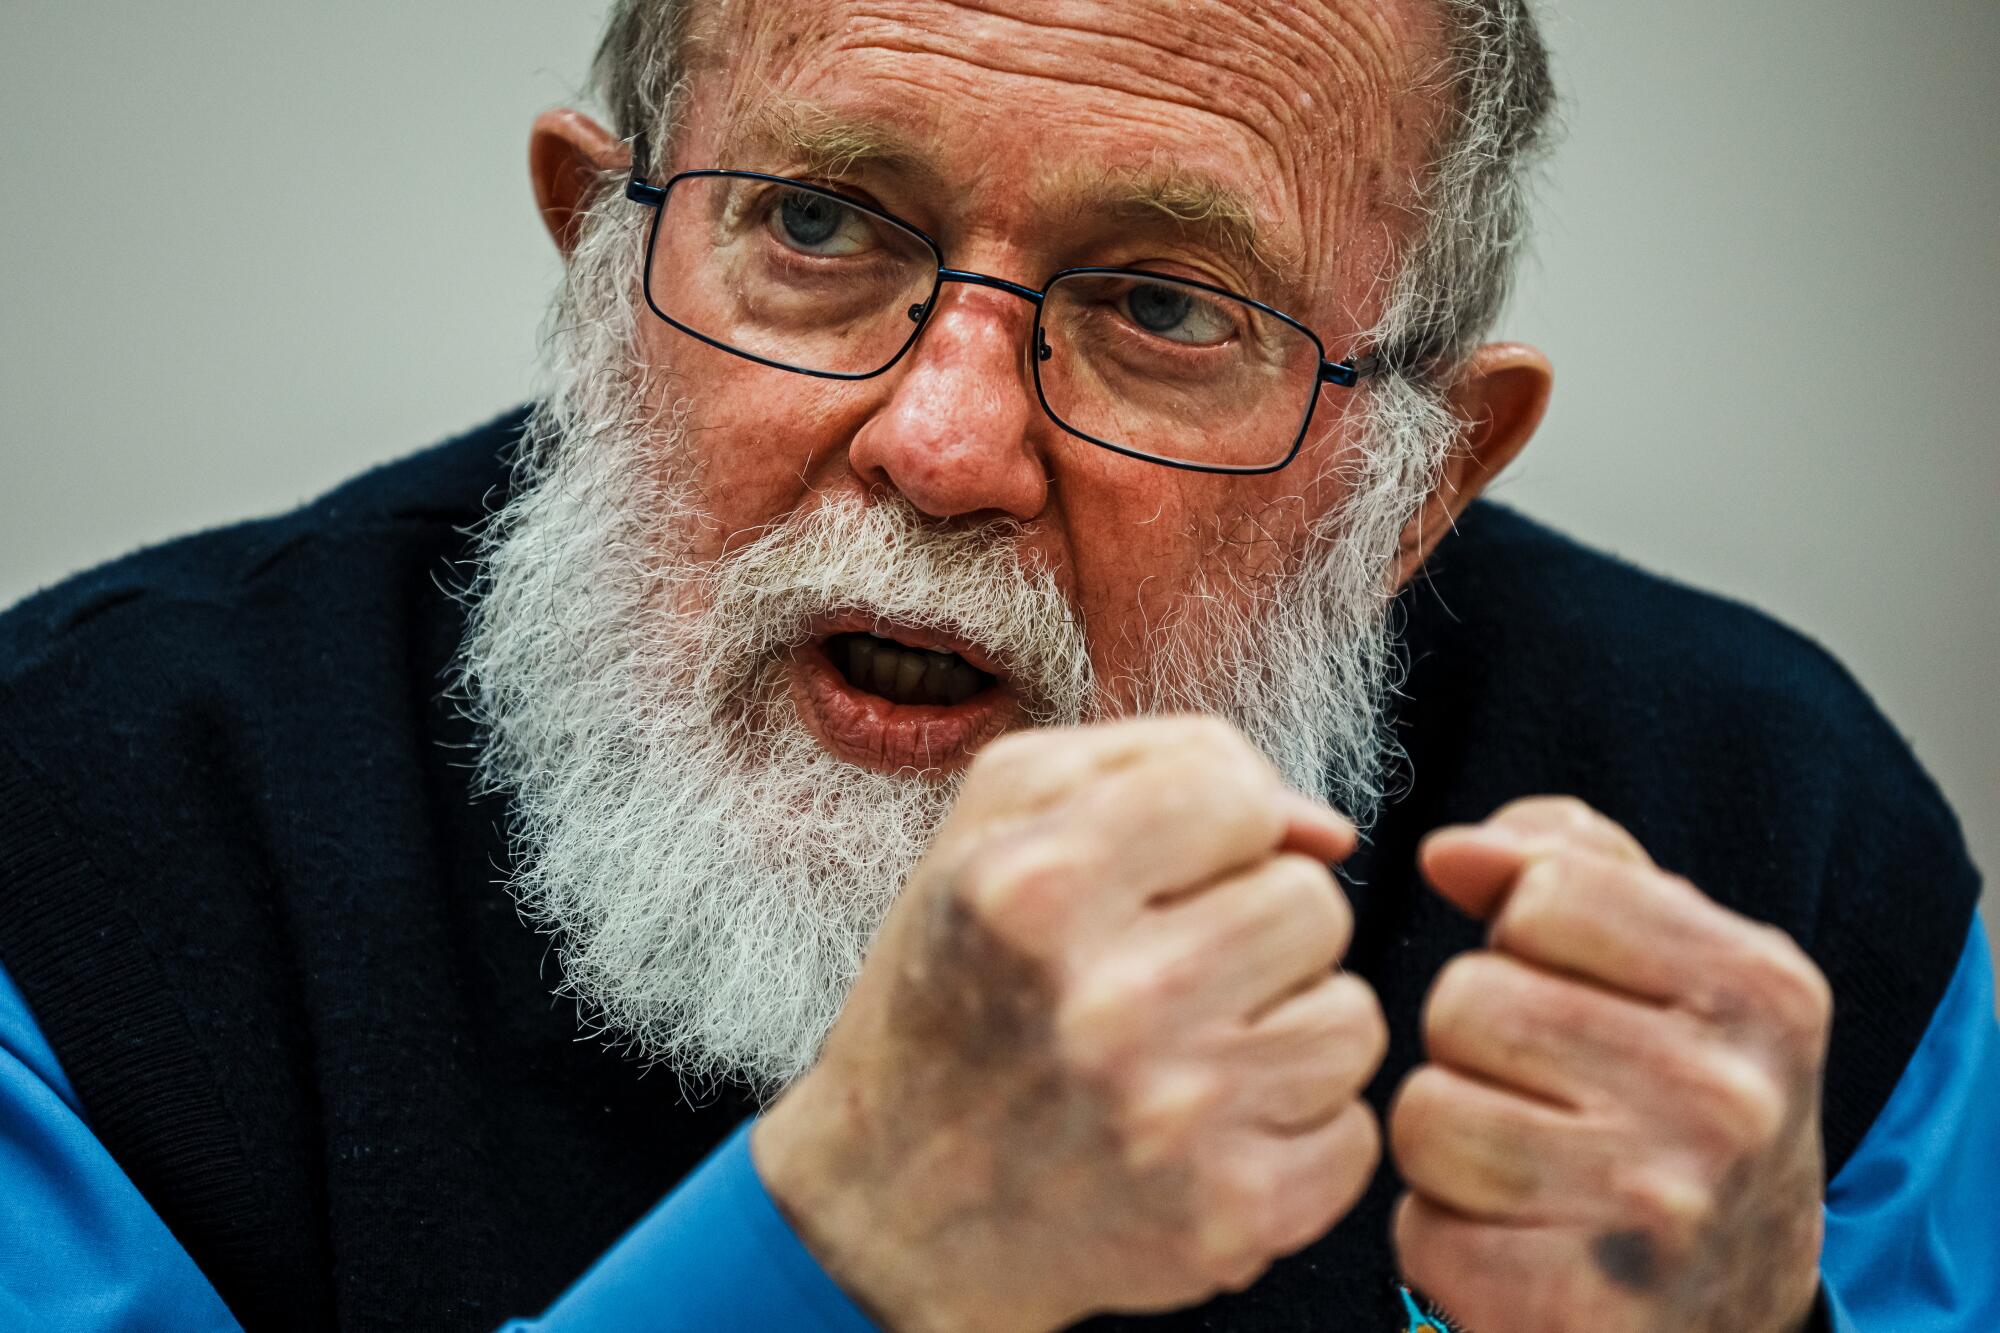 A closeup of a man with glasses and a white beard, holding his fists together near his face as he speaks